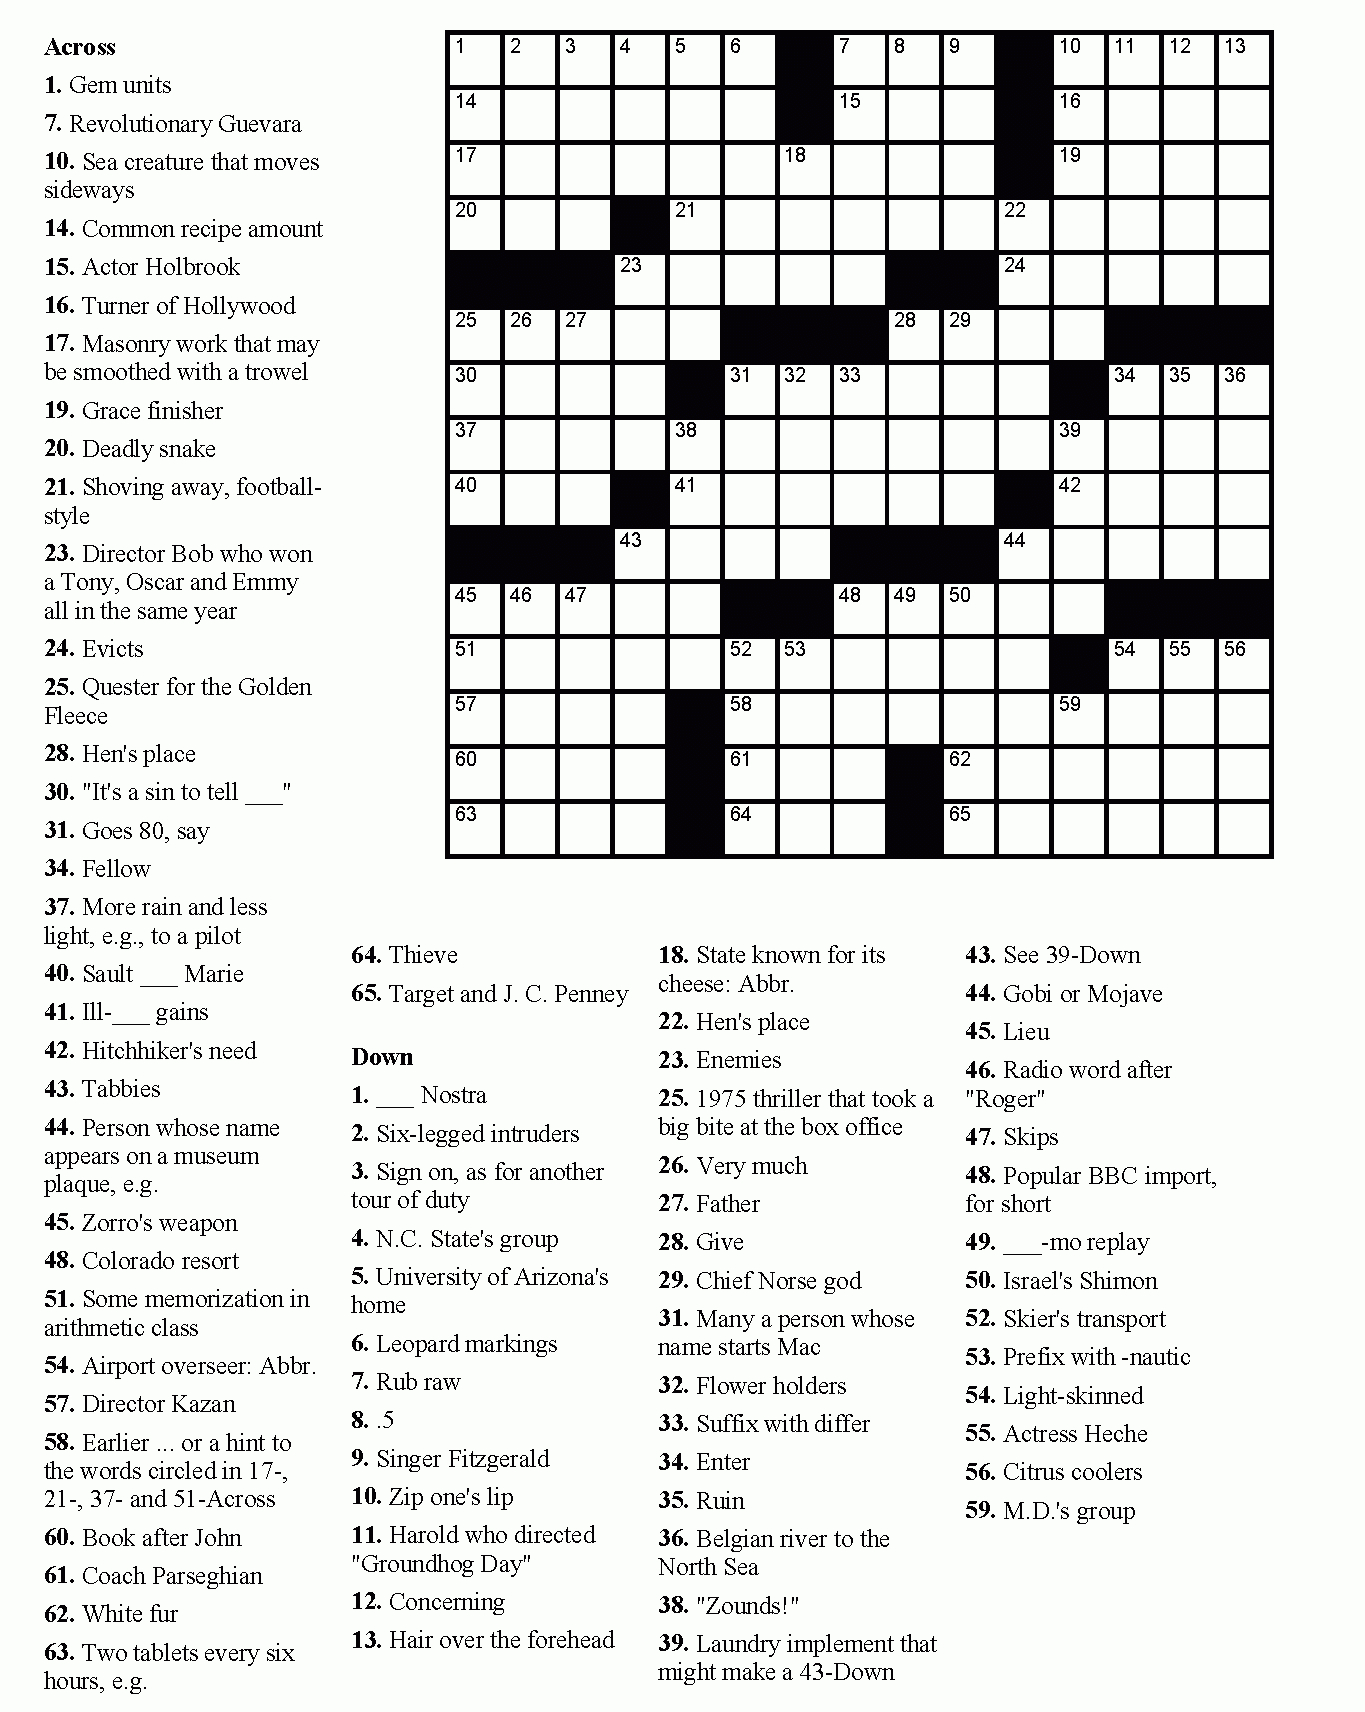 Free Printable Crossword Puzzles Easy For Adults | My Board - Free - Printable Crossword Puzzles For Young Adults